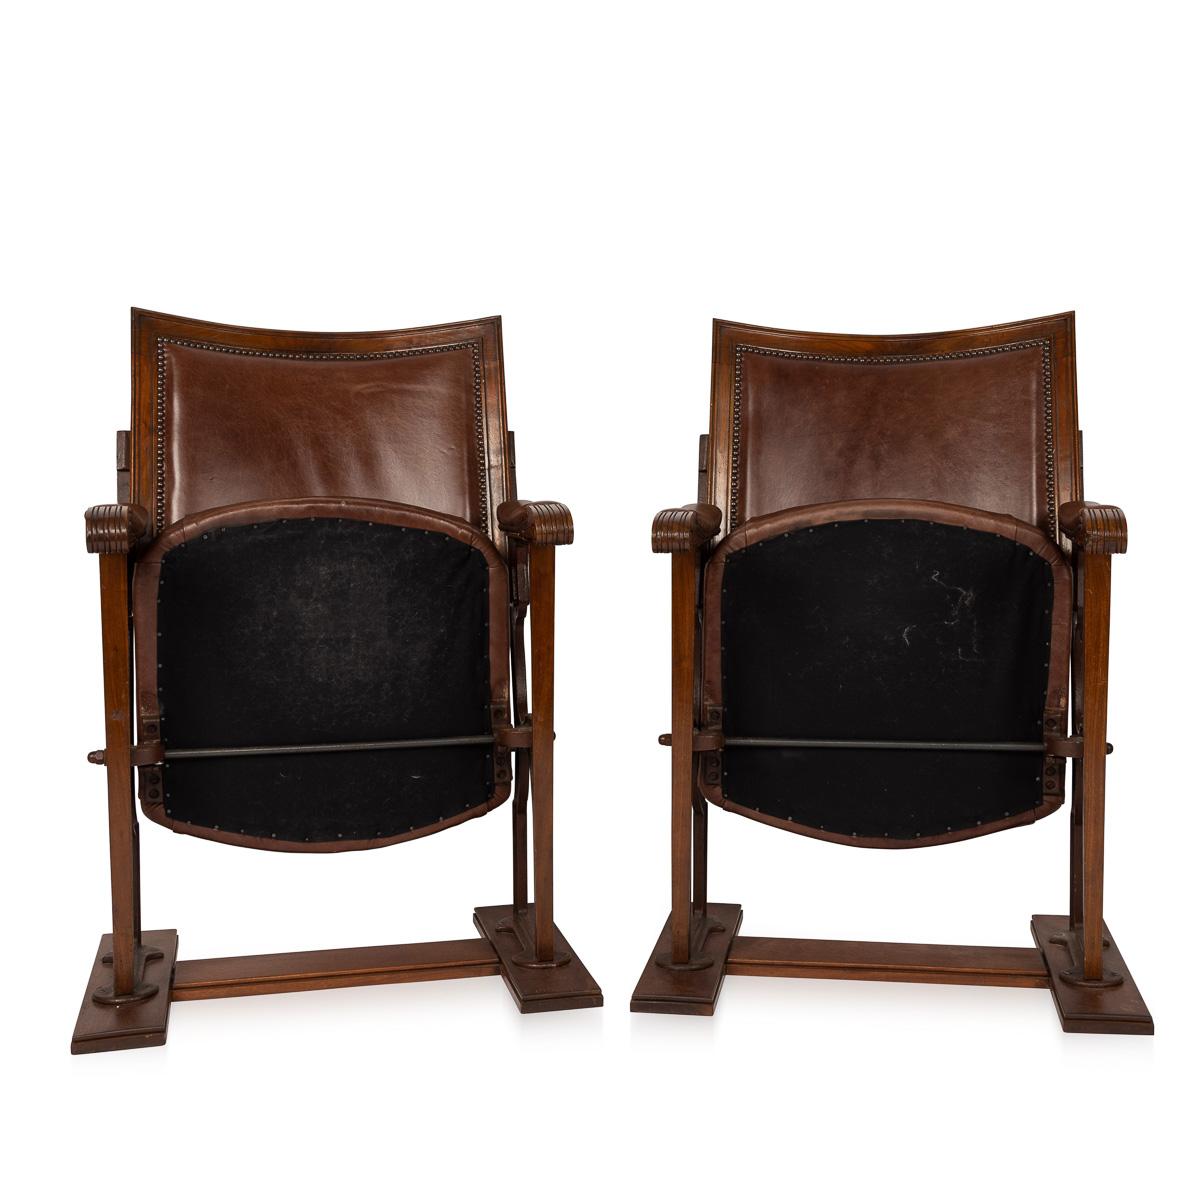 Antique 20th century Edwardian mahogany cinema / theatre chairs, on steel legs with mahogany frames and hand coloured leather seat and backs. Fantastic look for any interior, both modern and traditional.

Measures: Height 98cm
Seat height